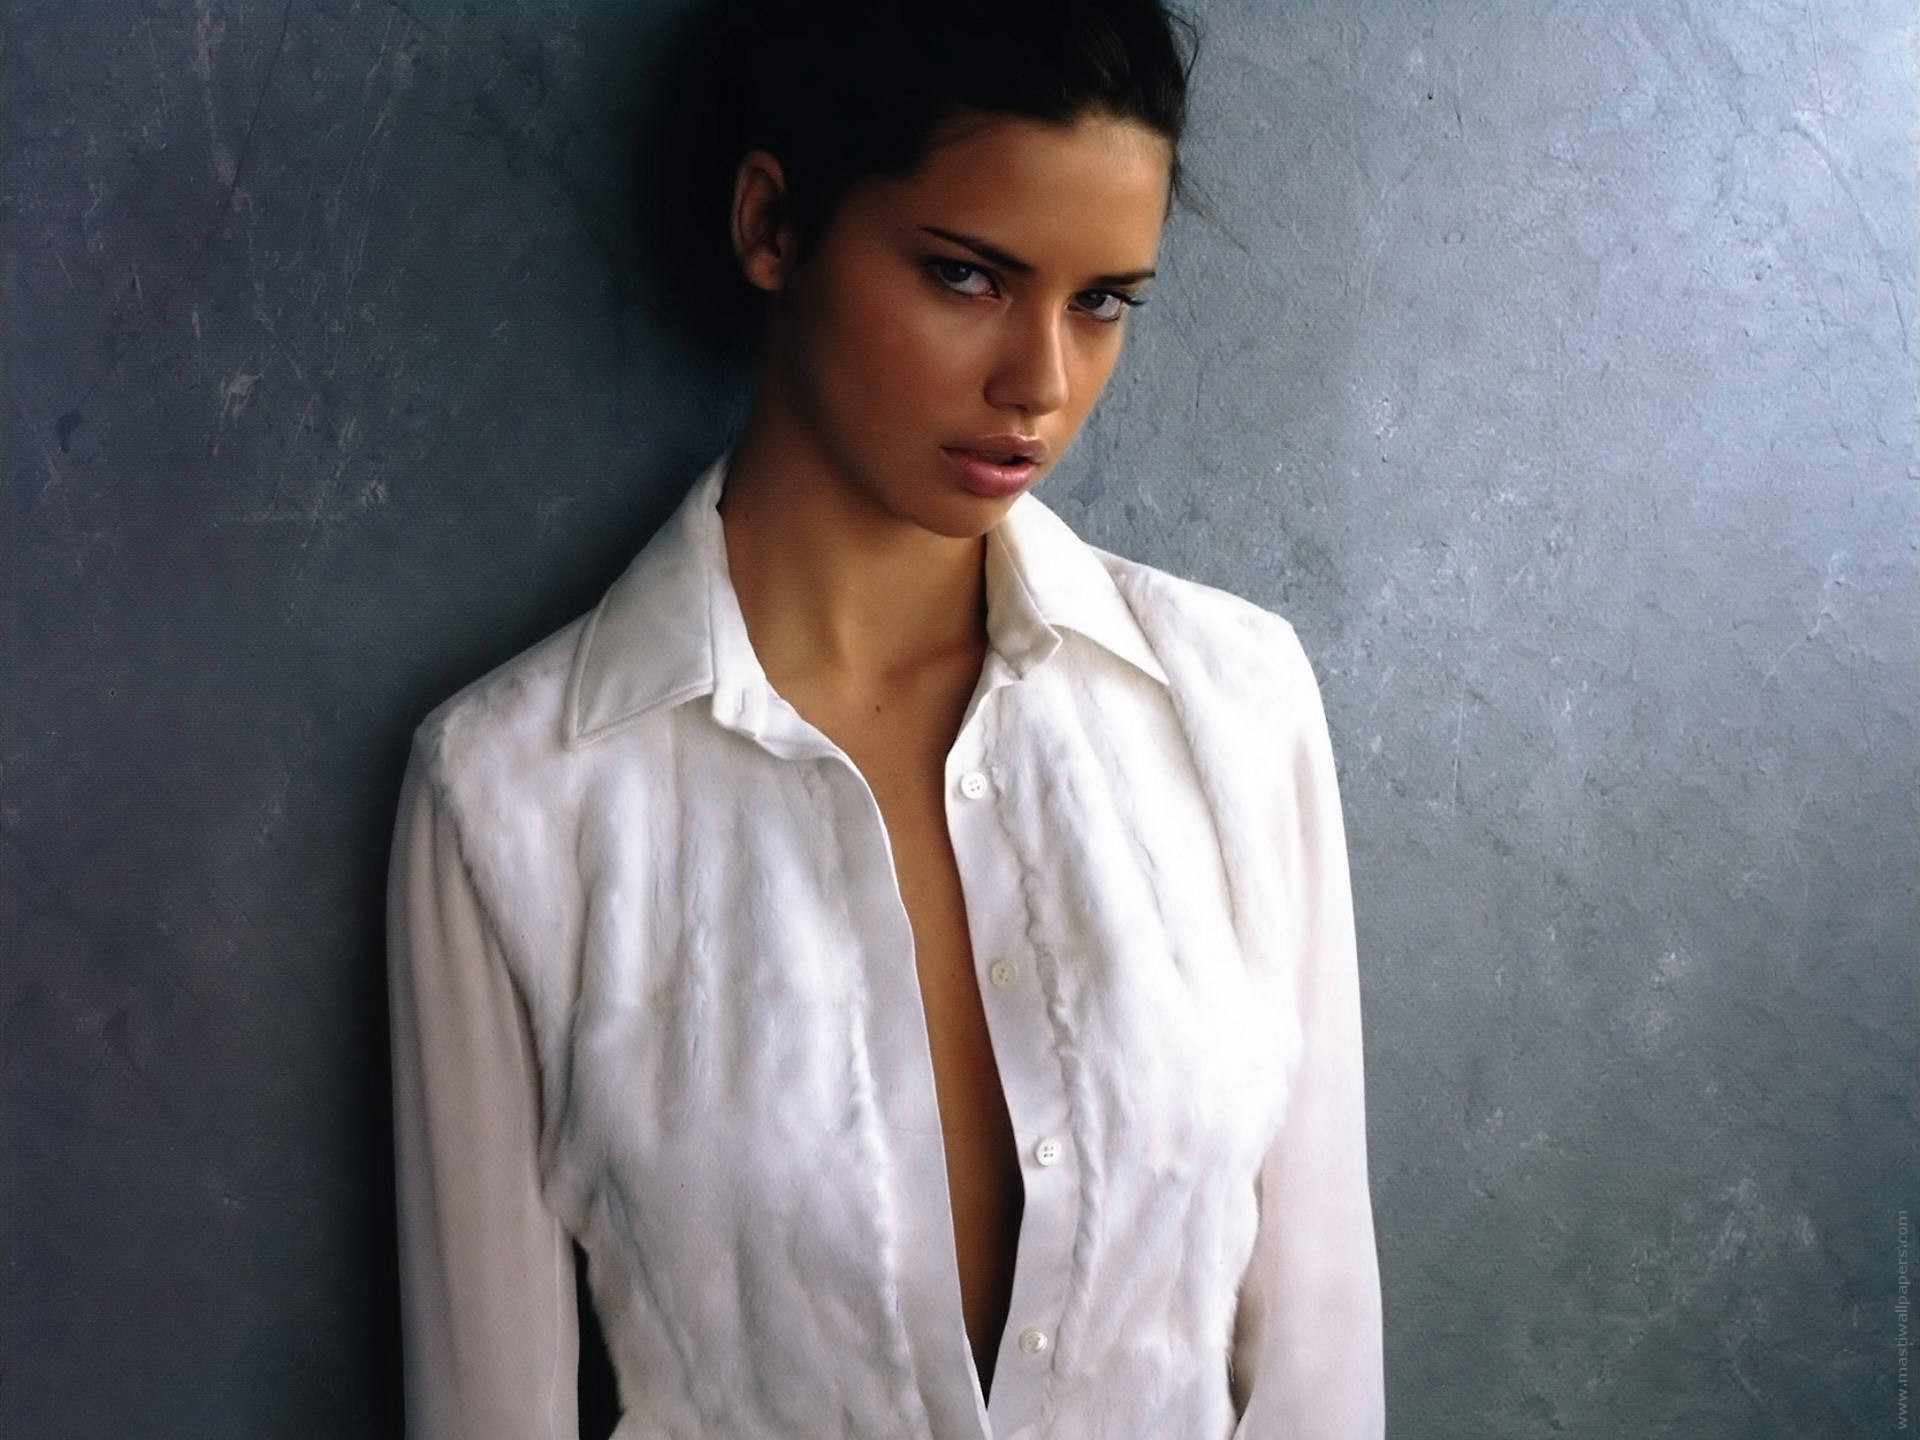 Adriana Lima, glamorous celebrity in this captivating desktop wallpaper.